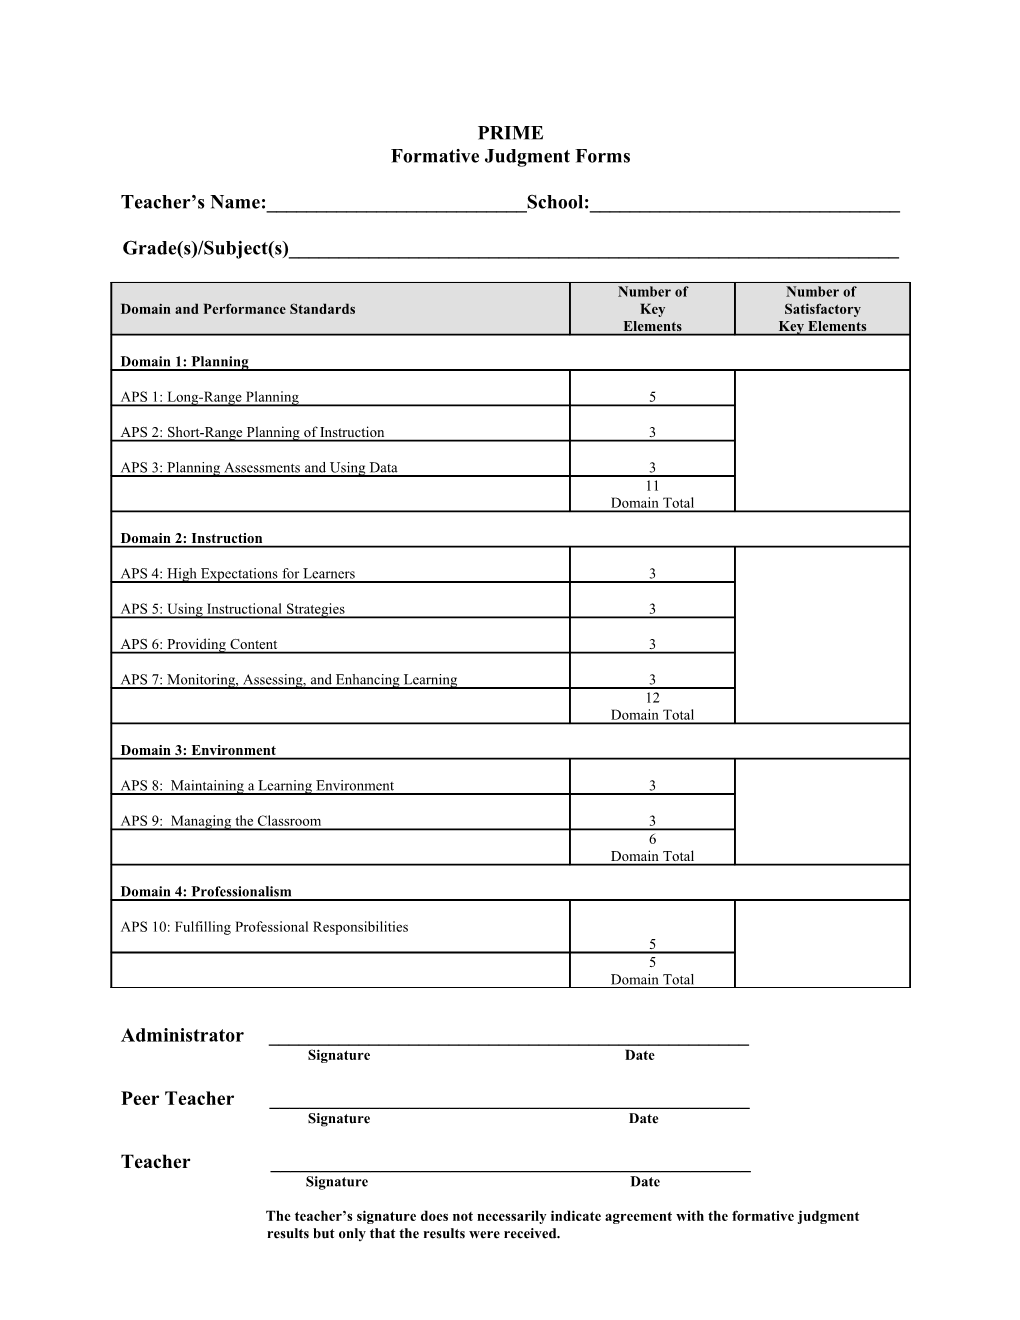 Formative Judgment Forms